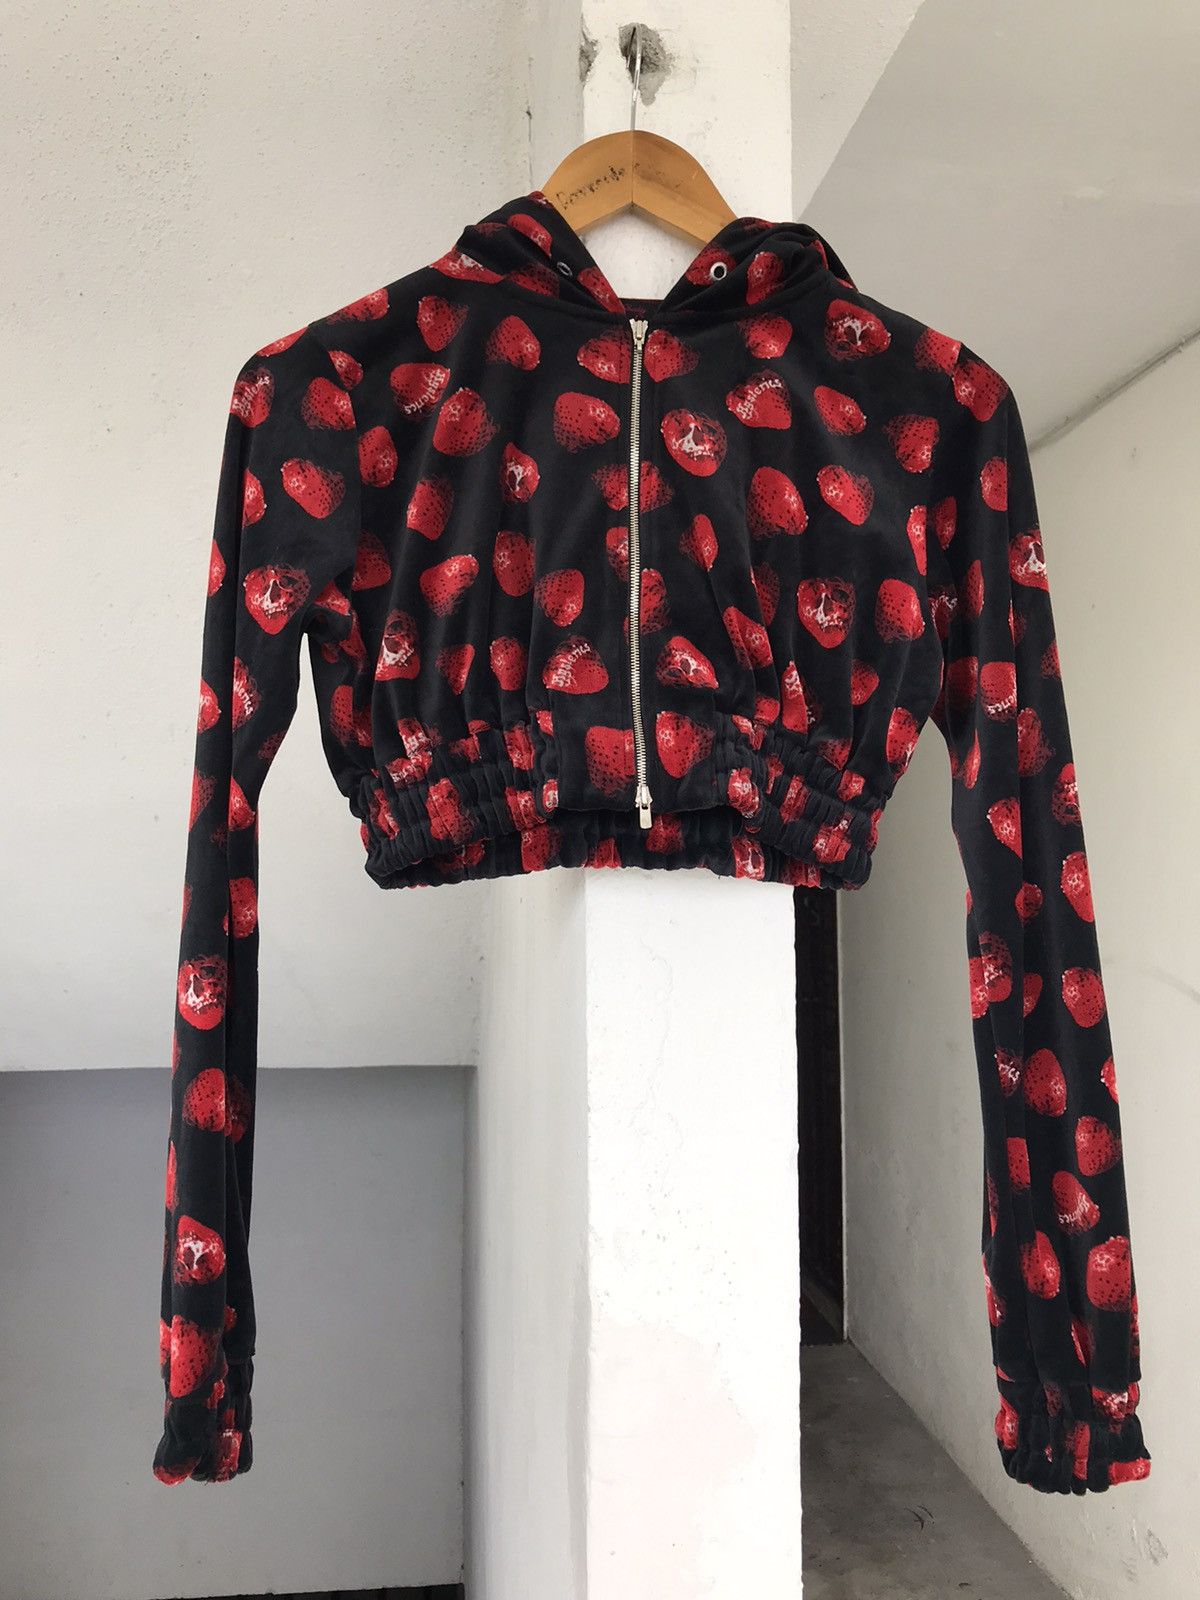 Hysteric Glamour Skull Strawberry | Grailed